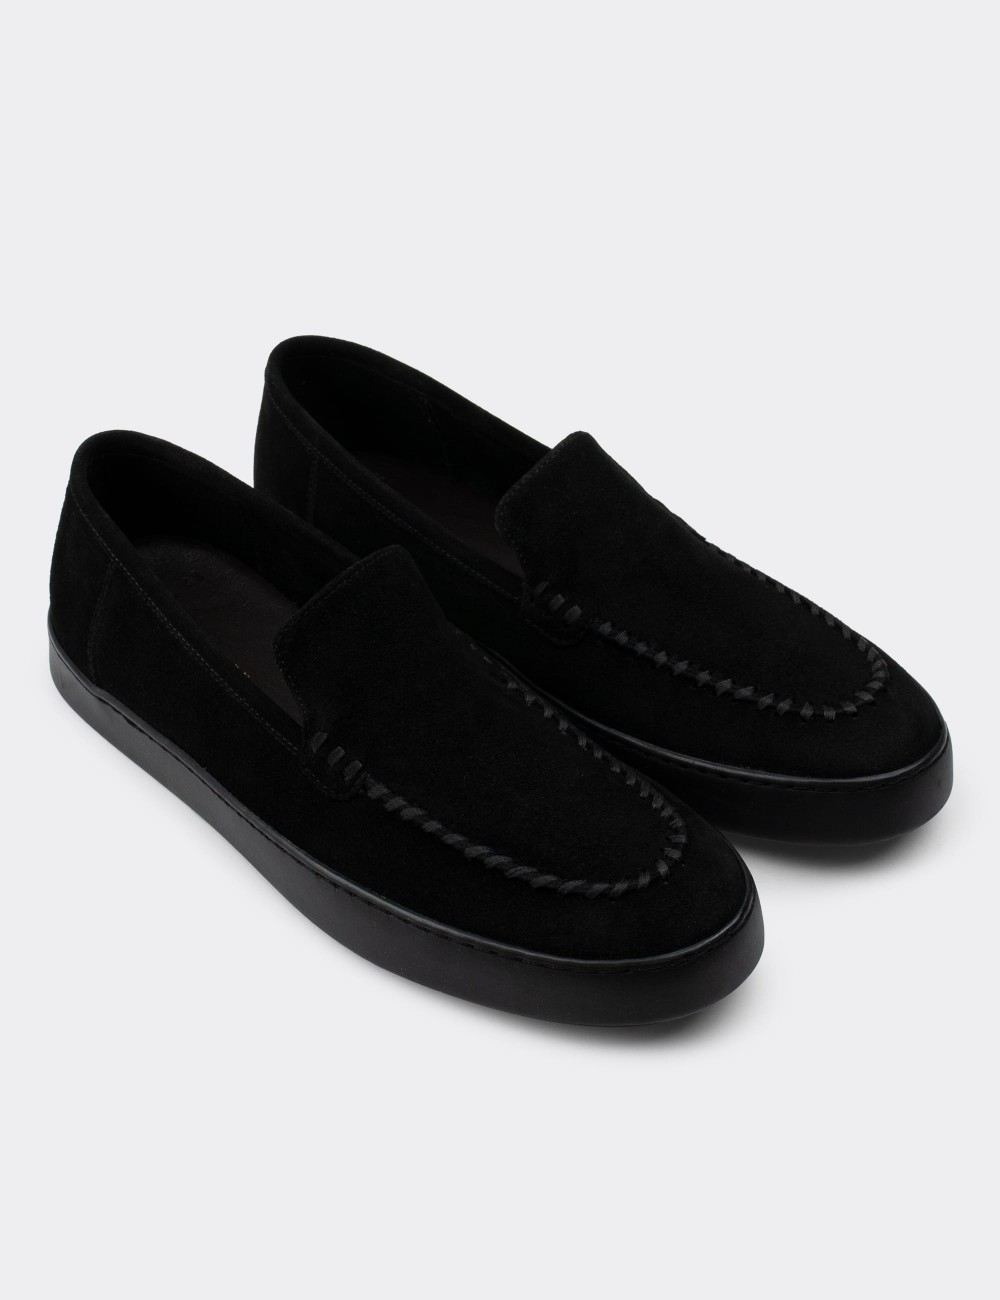 Black Suede Leather Loafers - 01866MSYHC01